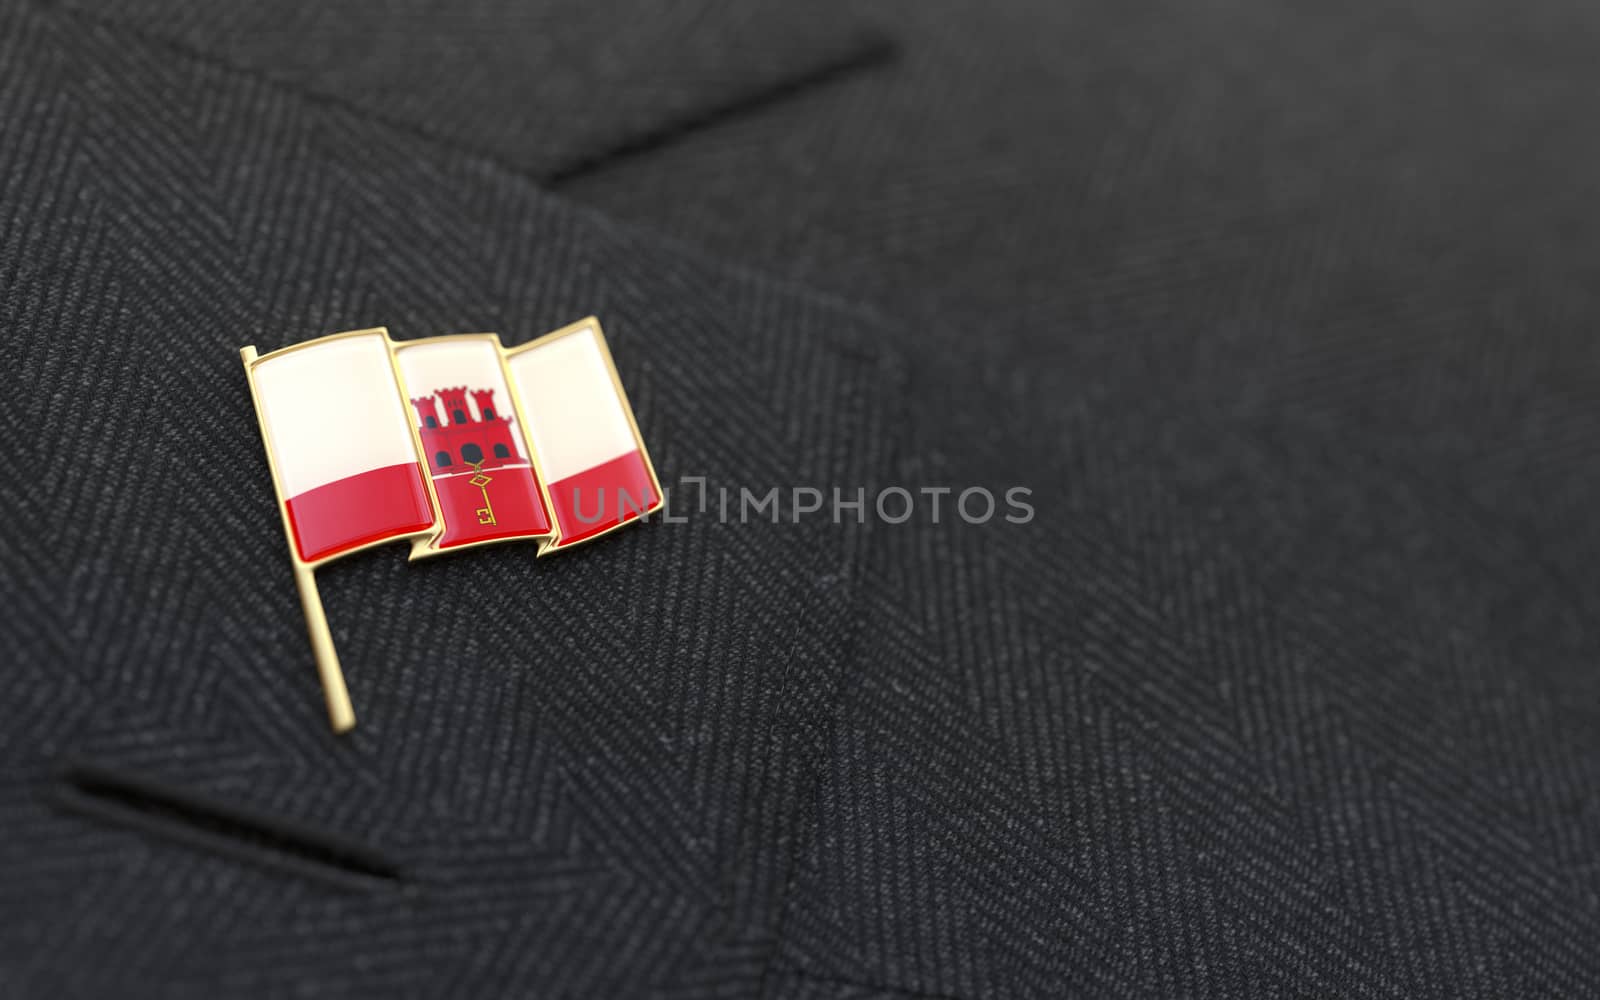 Gibraltar flag lapel pin on the collar of a business suit jacket shows patriotism